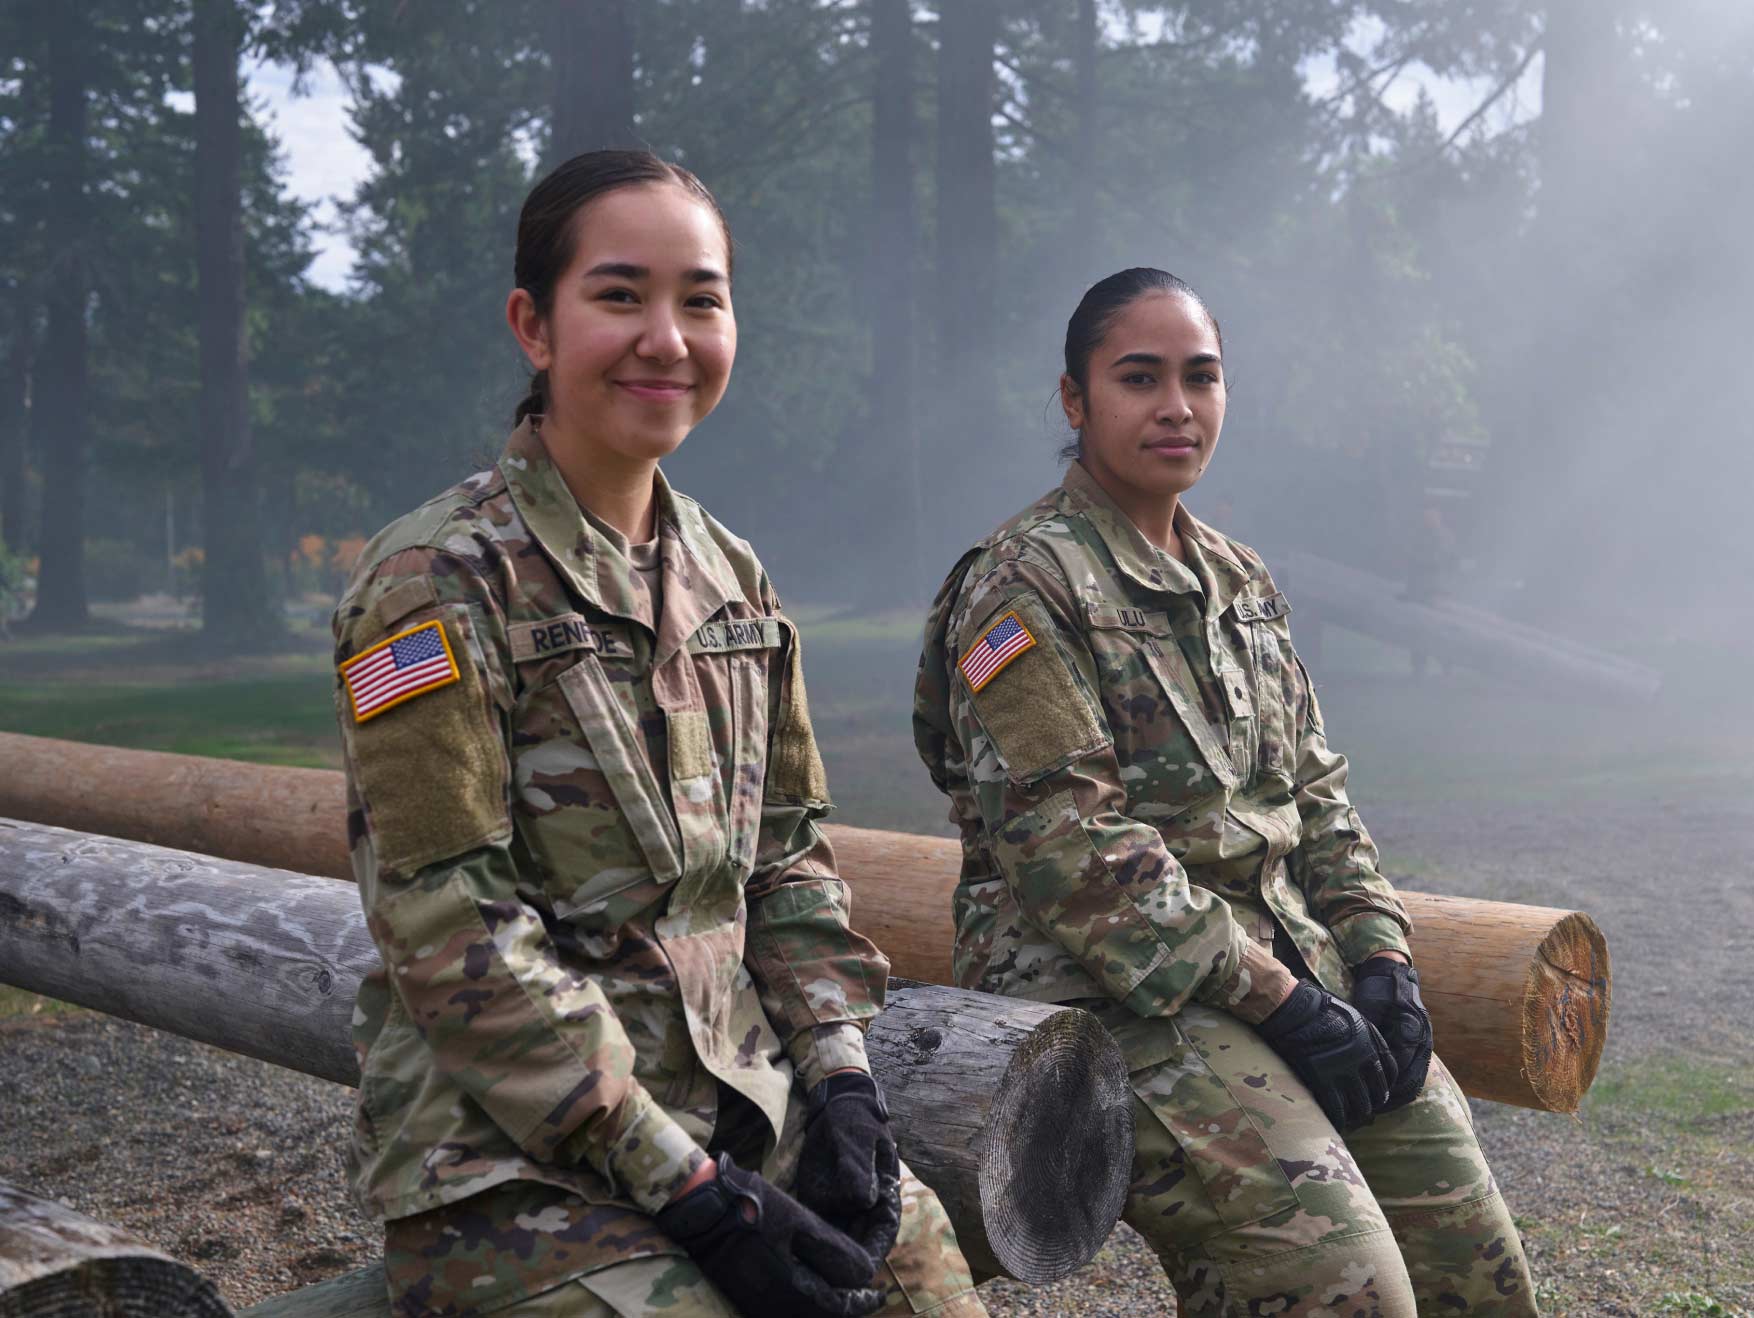 Two female ROTC cadets sitting outside against a wooden obstacle